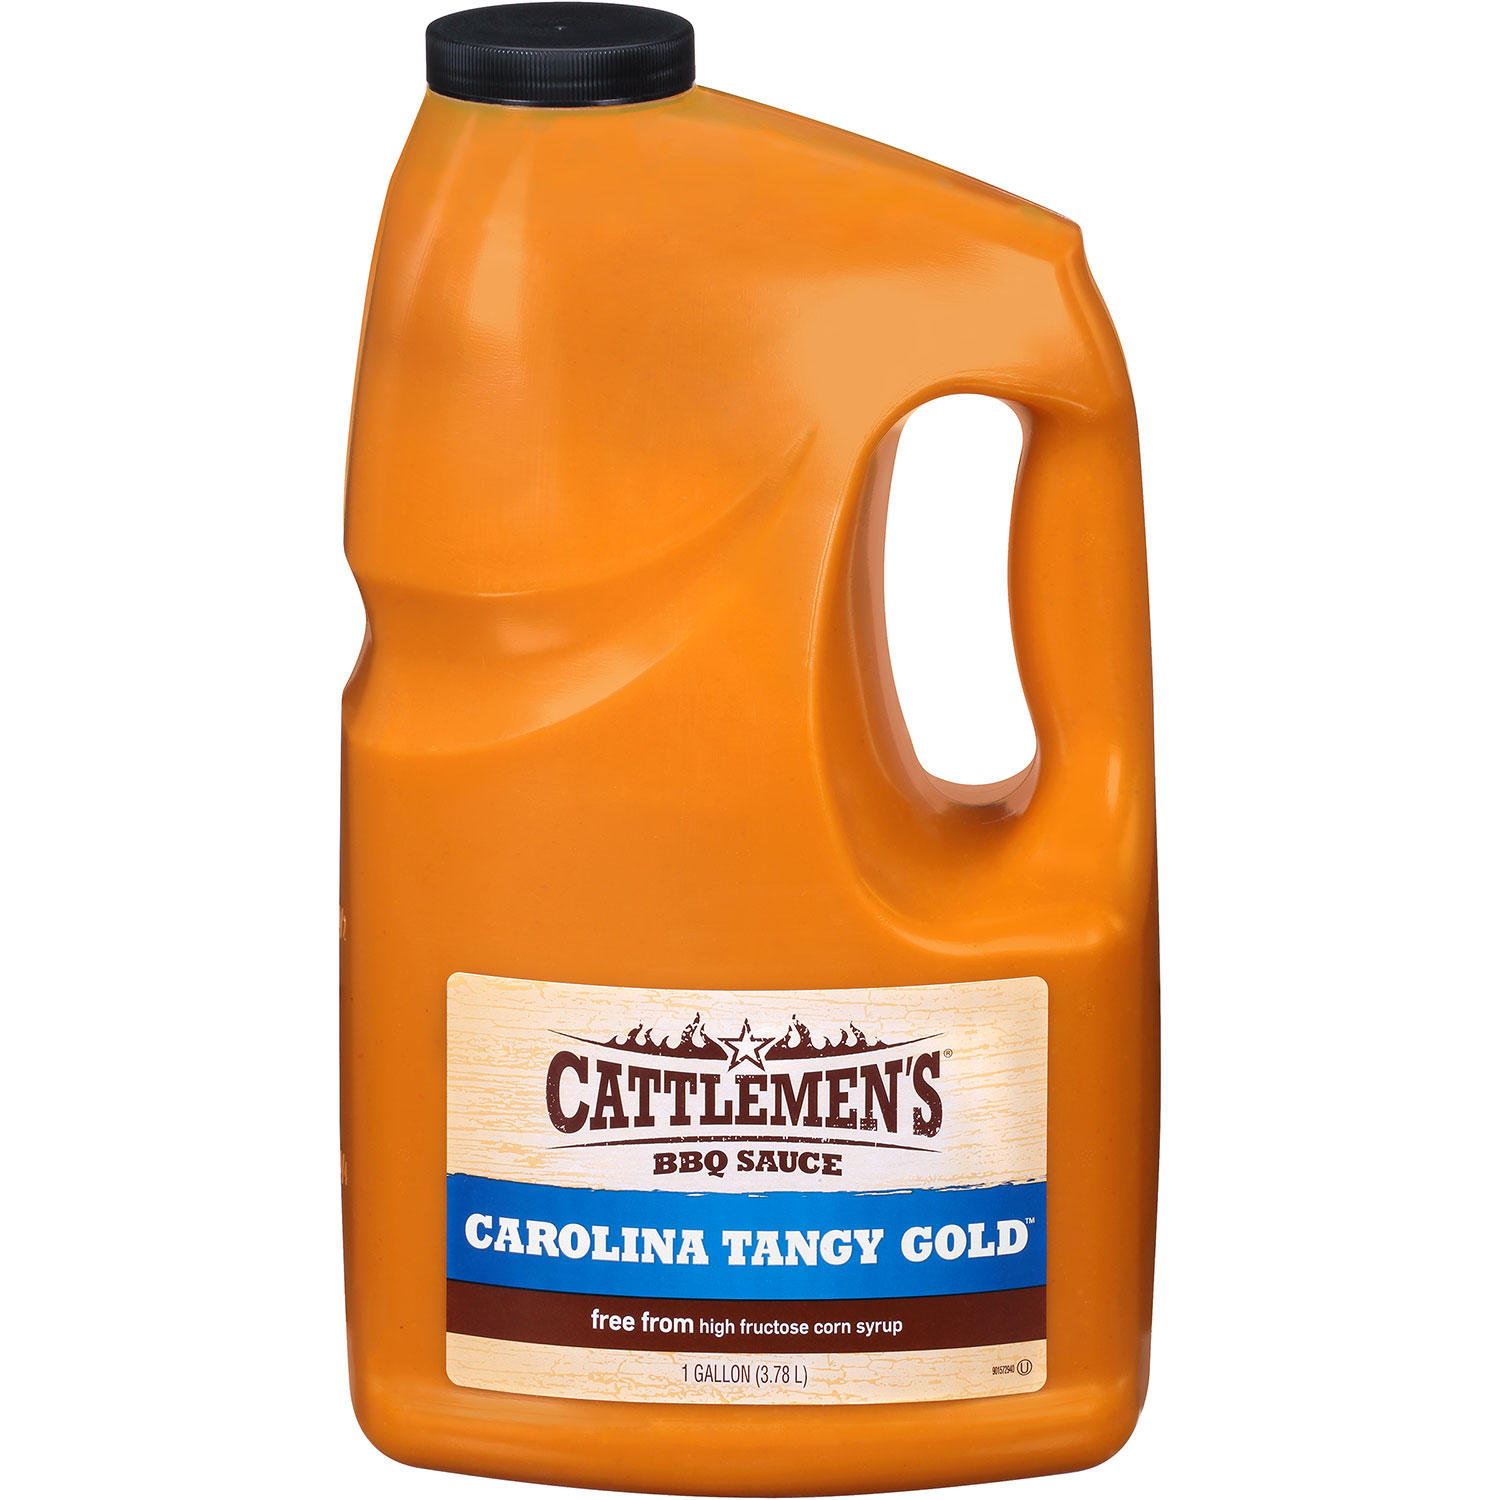 Cattlemen's Carolina Tangy Gold Barbecue Sauce